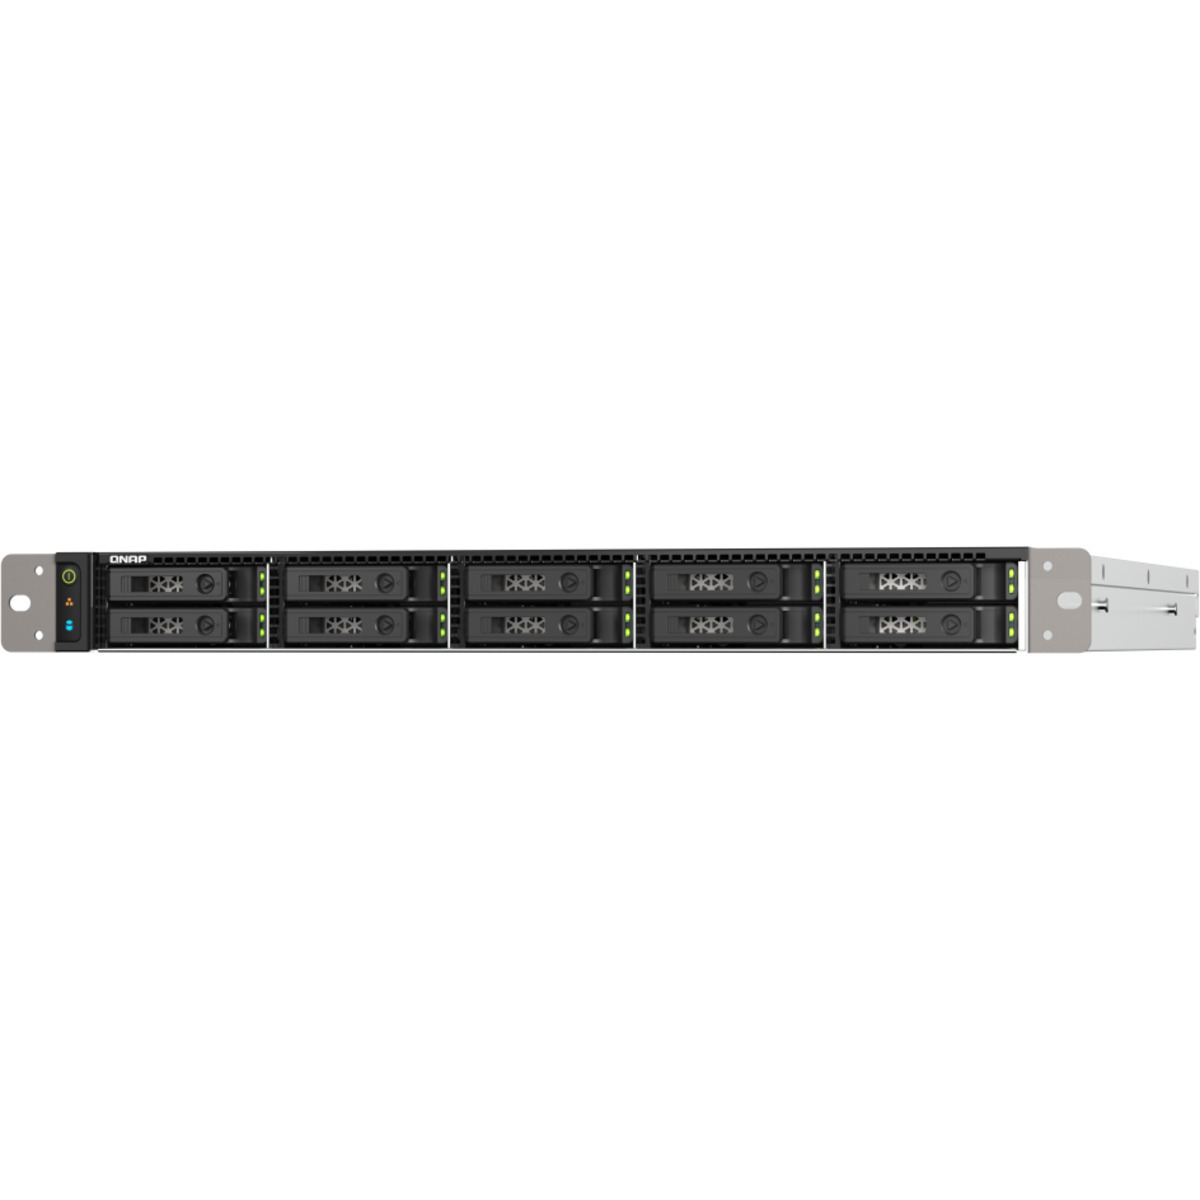 QNAP TS-h1090FU-7302P 16tb 10-Bay RackMount Large Business / Enterprise NAS - Network Attached Storage Device 8x2tb Sabrent Rocket 4 Plus SB-RKT4P-2TB  7000/6850MB/s M.2 2280 NVMe SSD CONSUMER Class Drives Installed - Burn-In Tested TS-h1090FU-7302P